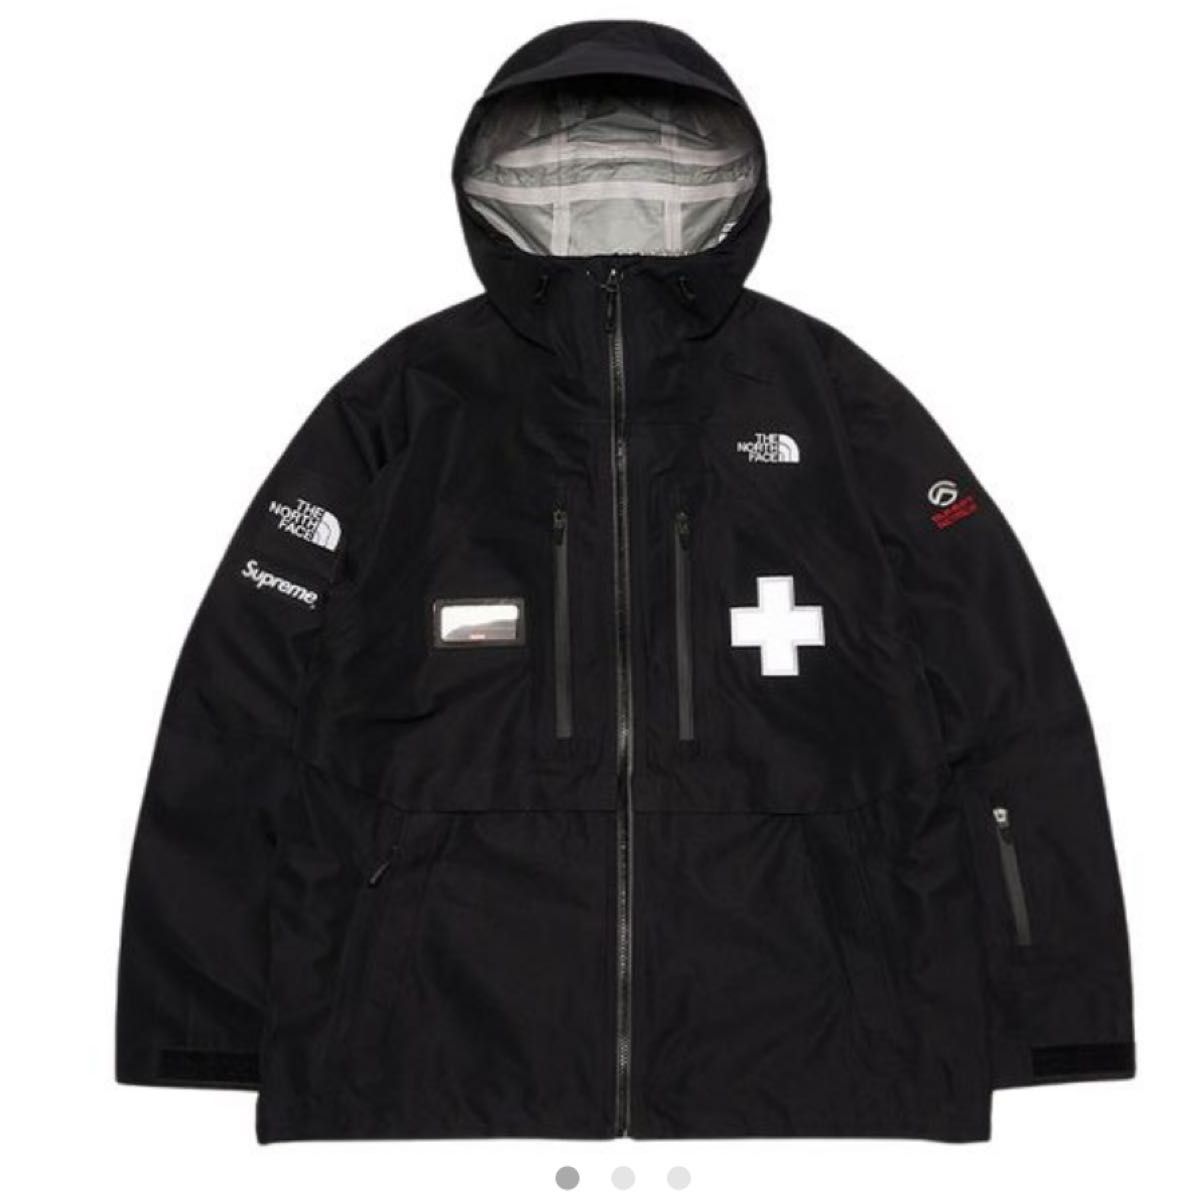 Supreme / The North Face Summit Series Rescue Mountain Pro Jacket